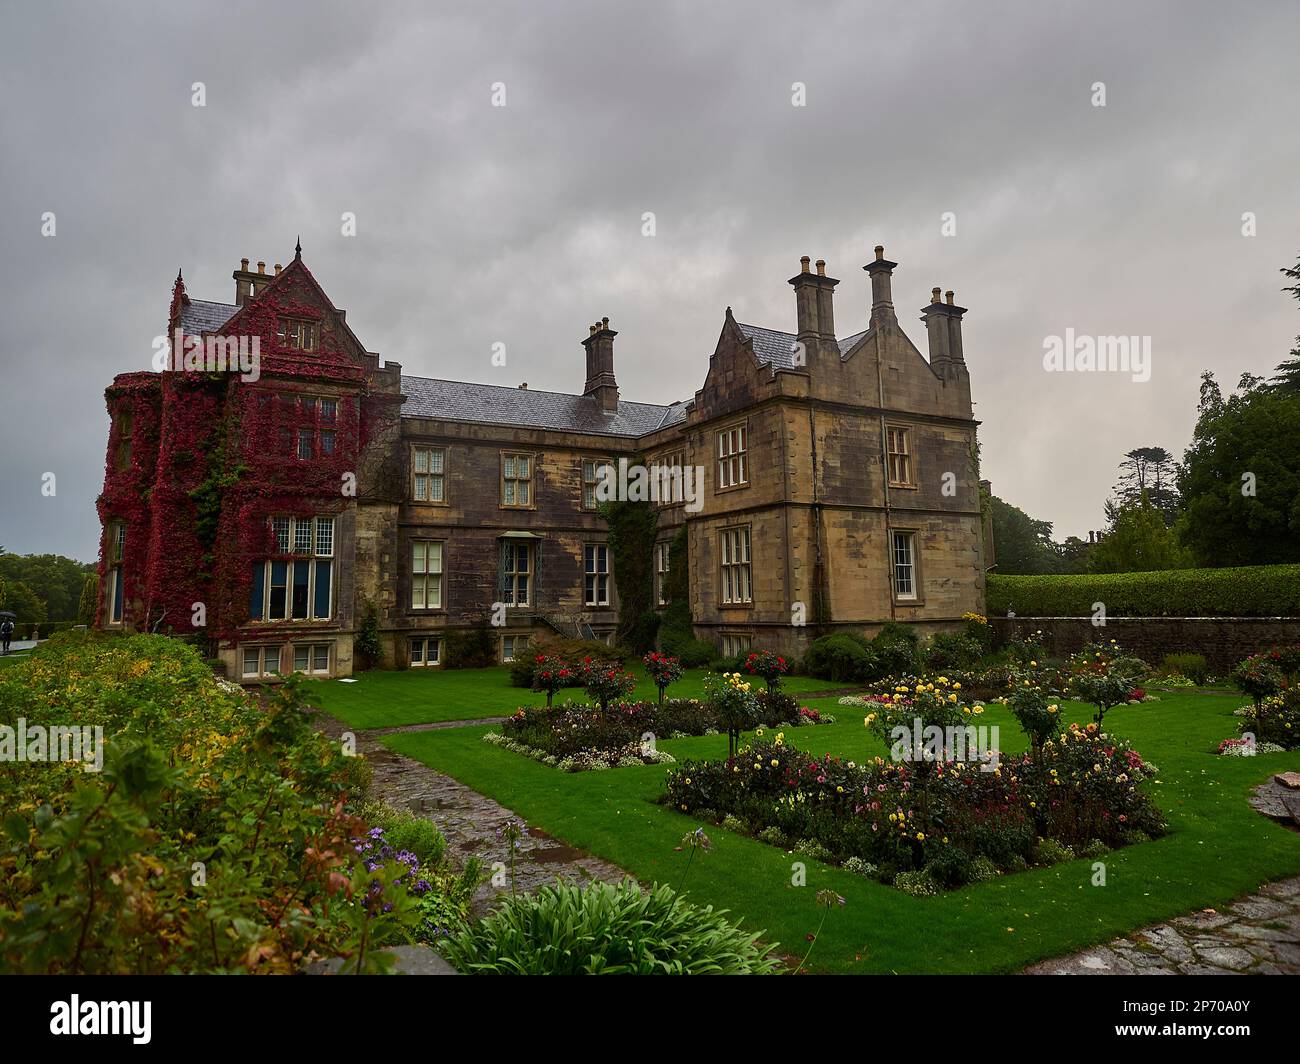 Killarney, Ireland - 09 22 2015: the old Killarney House is a popular travel destion close to the ring of Kerry. Stock Photo